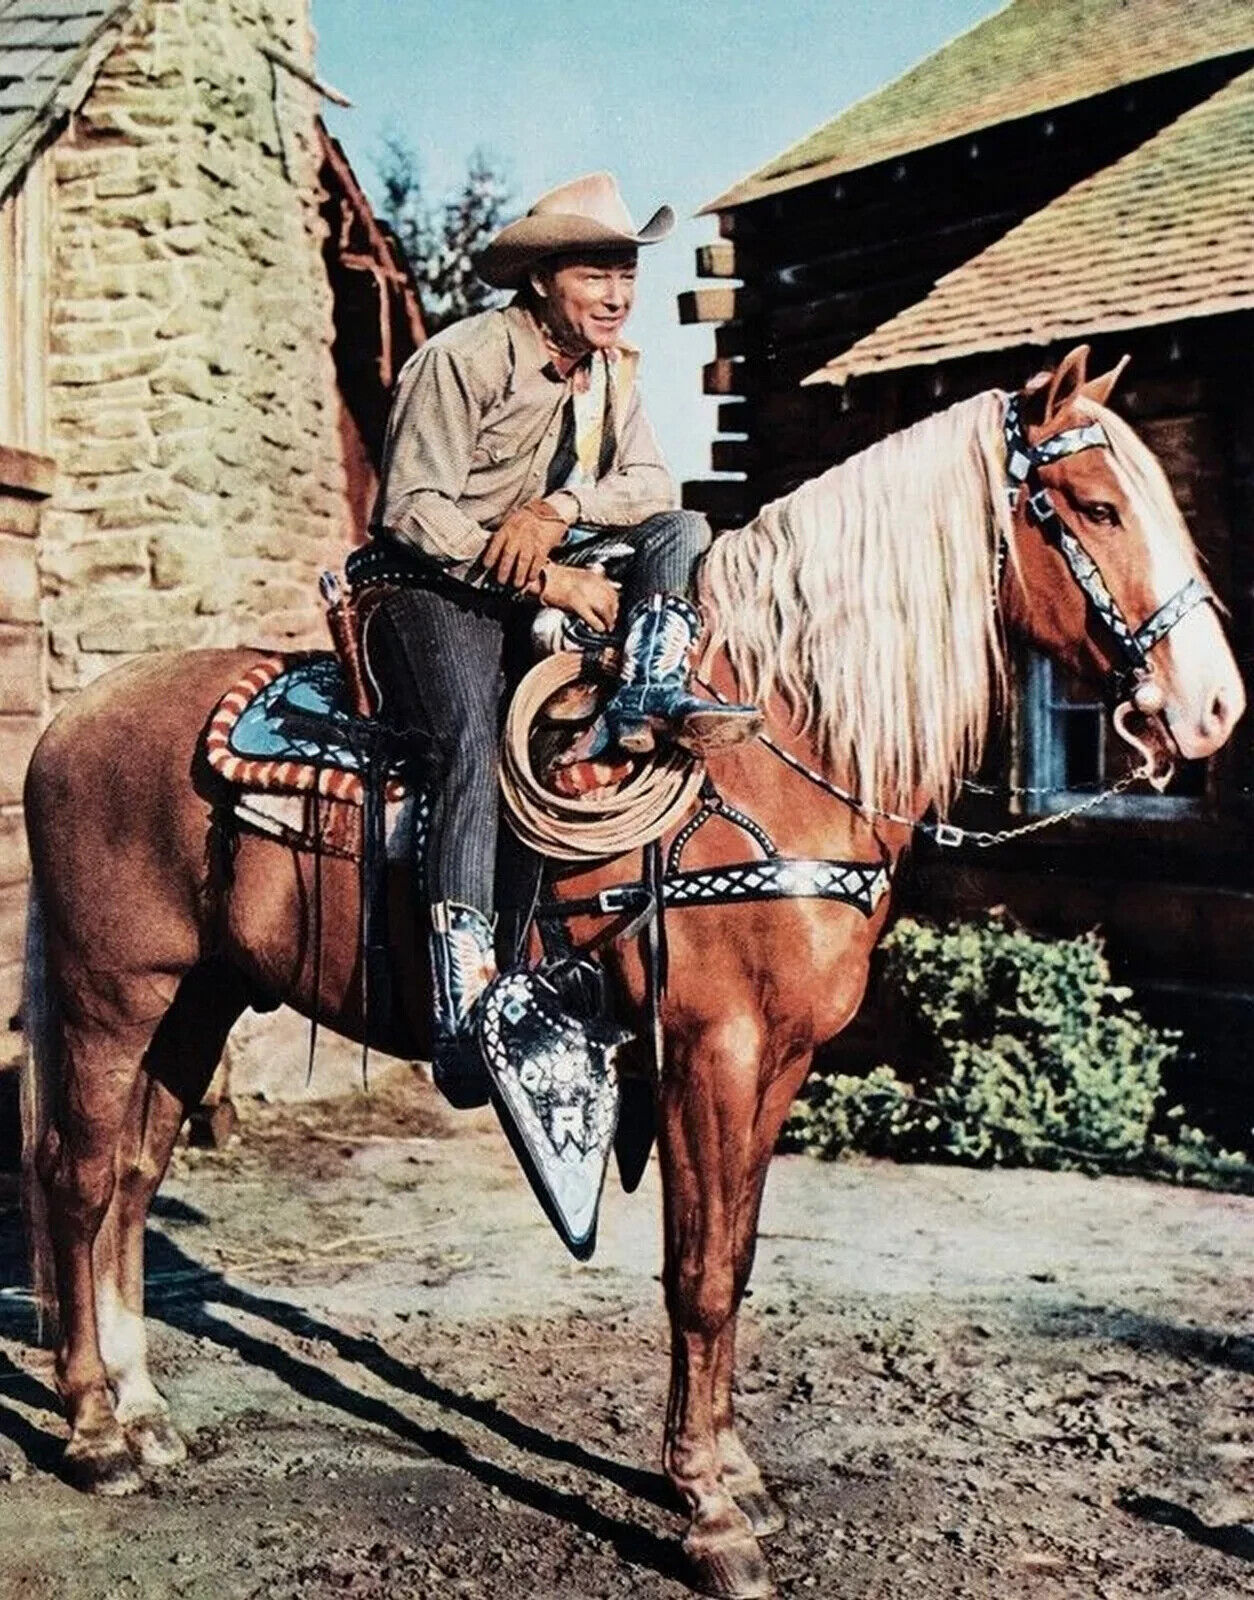 America's Cowboy ROY ROGERS & His Horse TRIGGER Classic Poster Photo 13x19